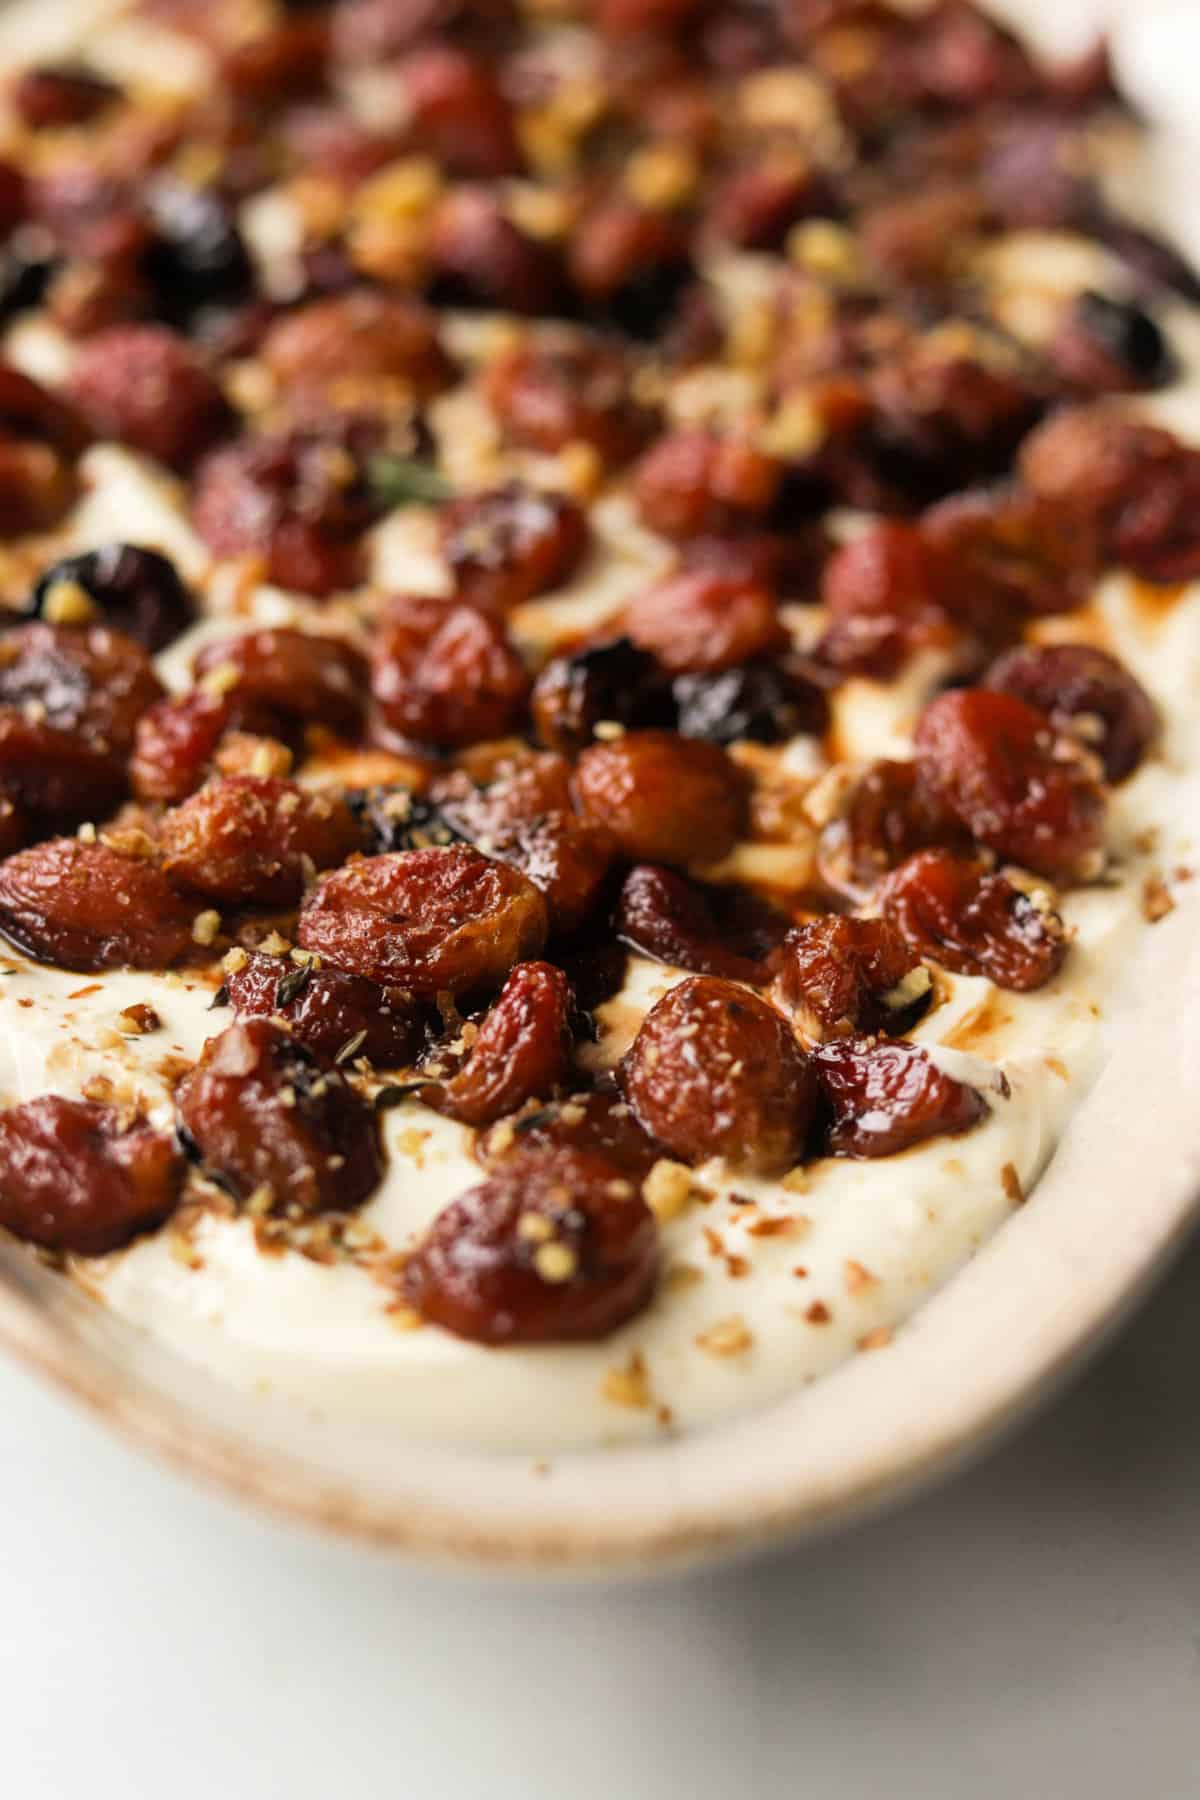 A close up front shot of roasted grapes on ricotta dip.